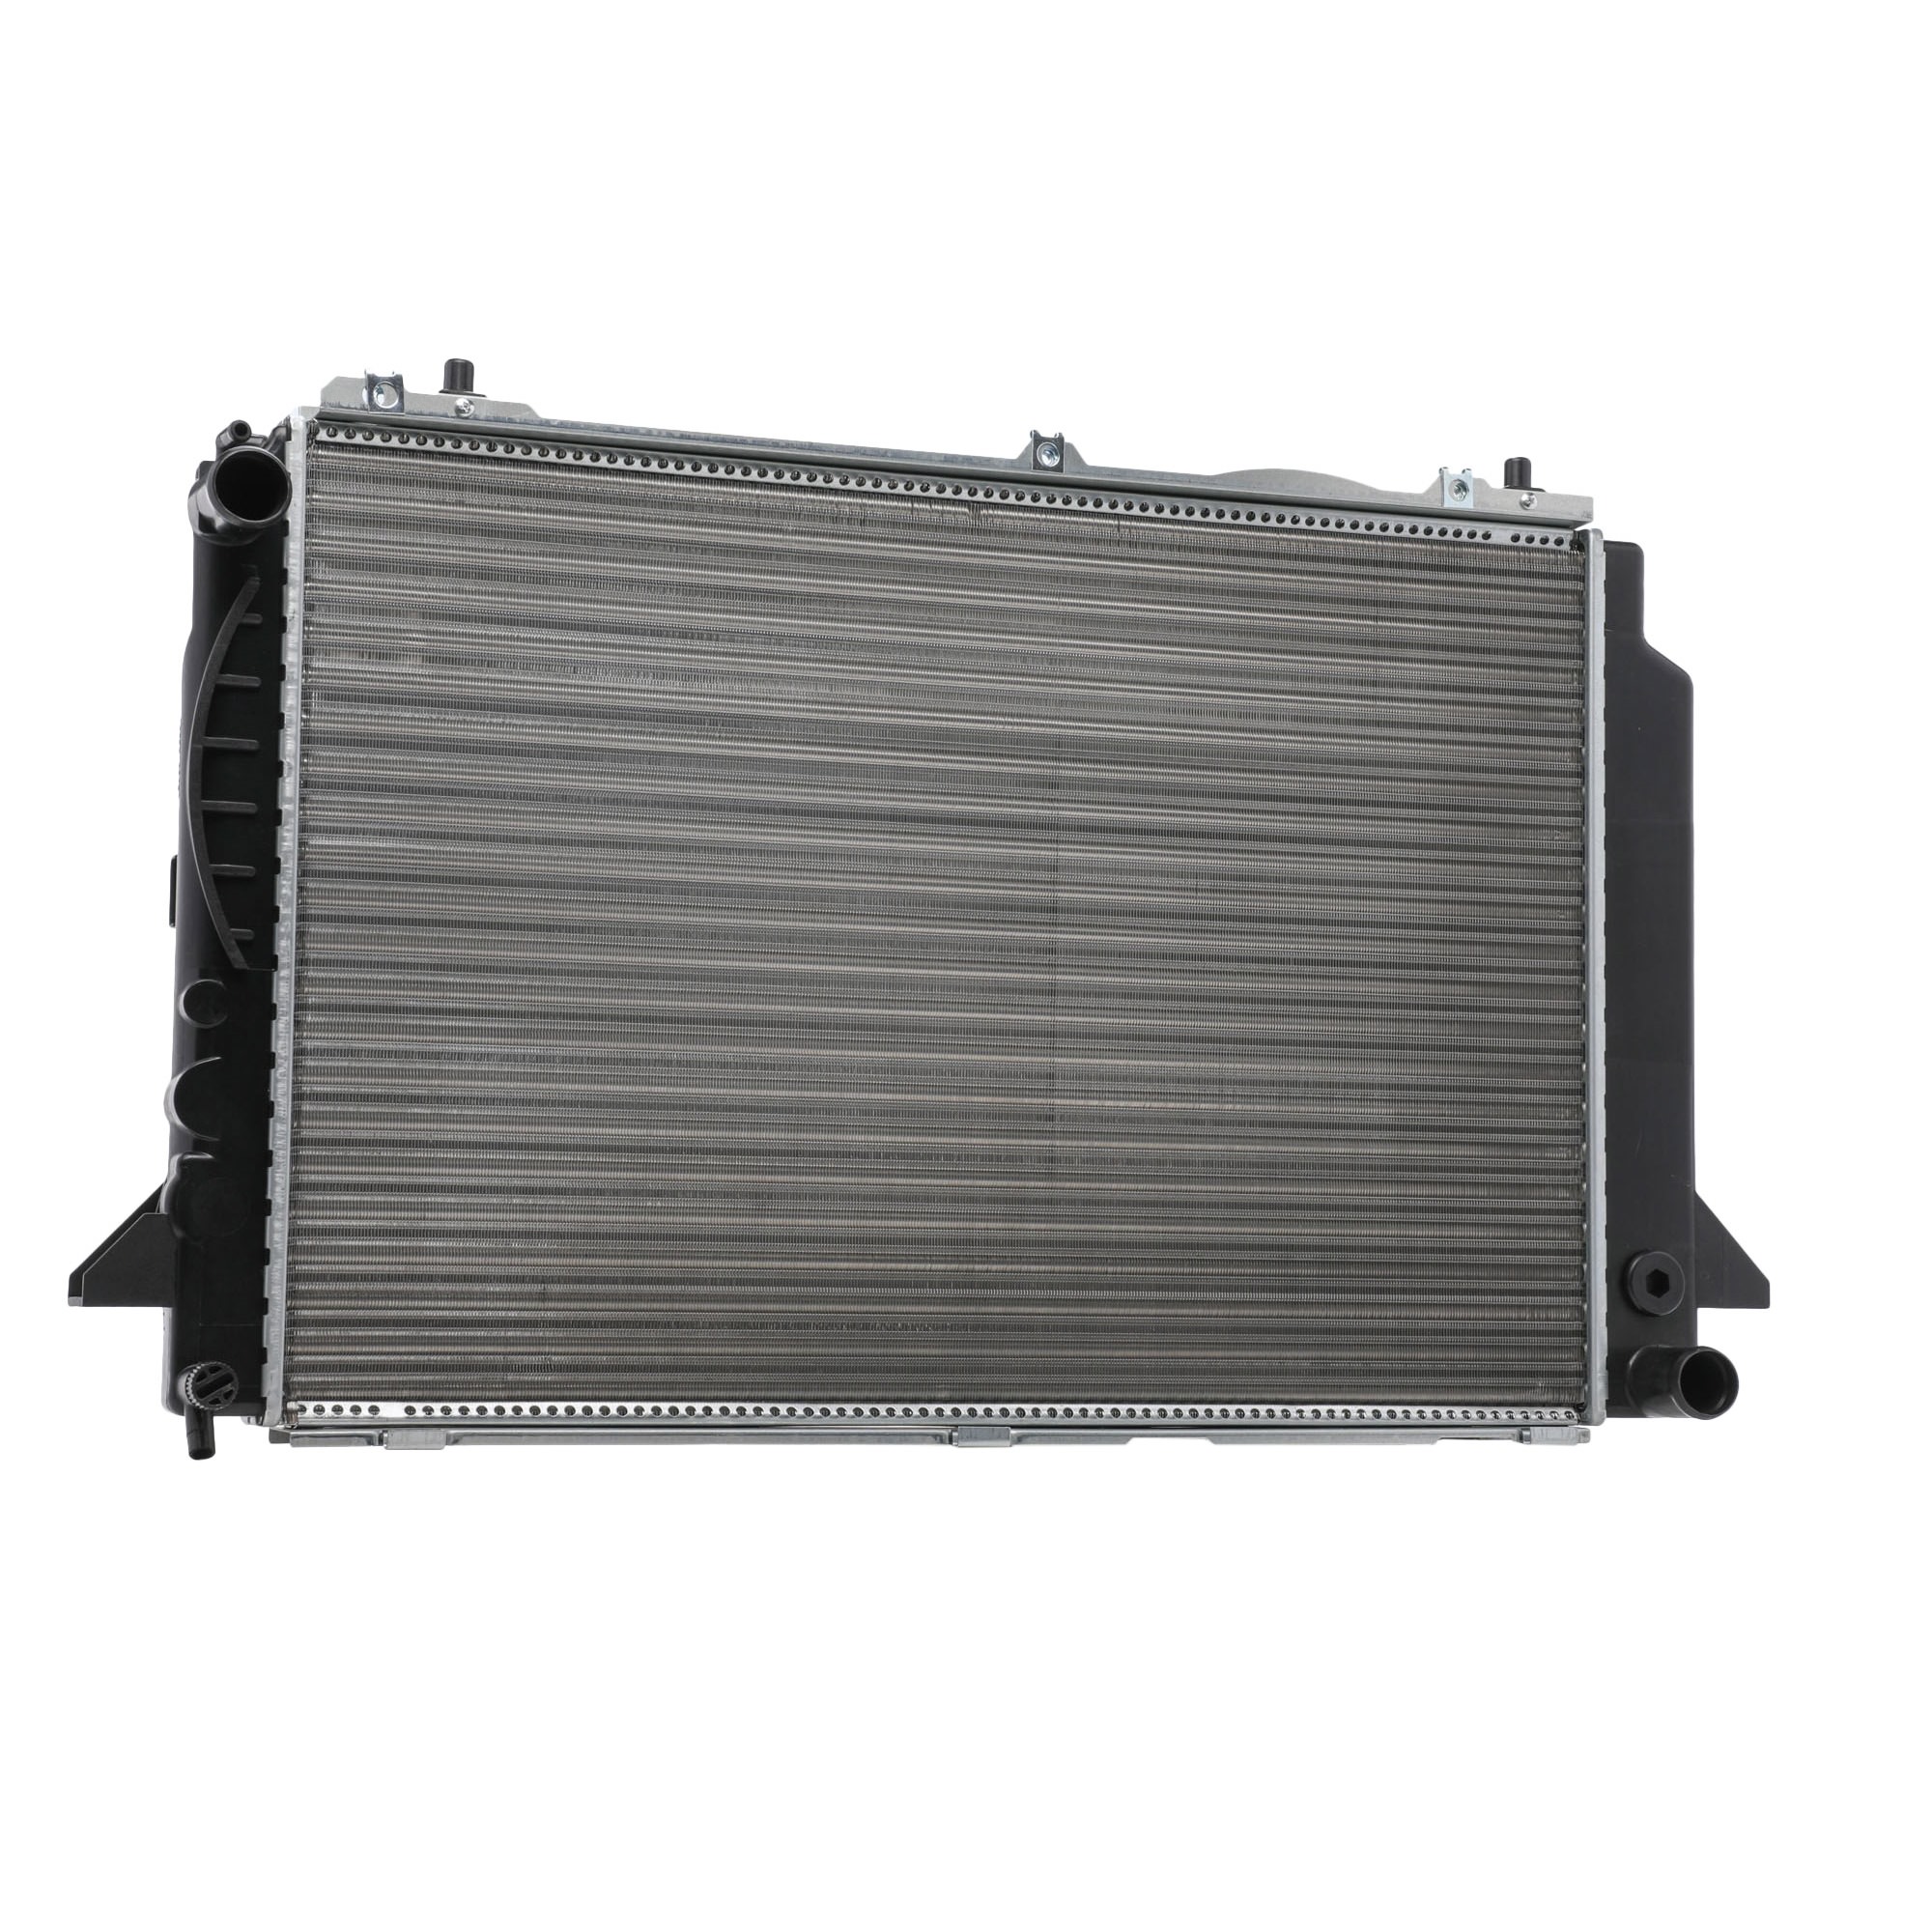 RIDEX 470R0390 Engine radiator Aluminium, for vehicles with/without air conditioning, Manual Transmission